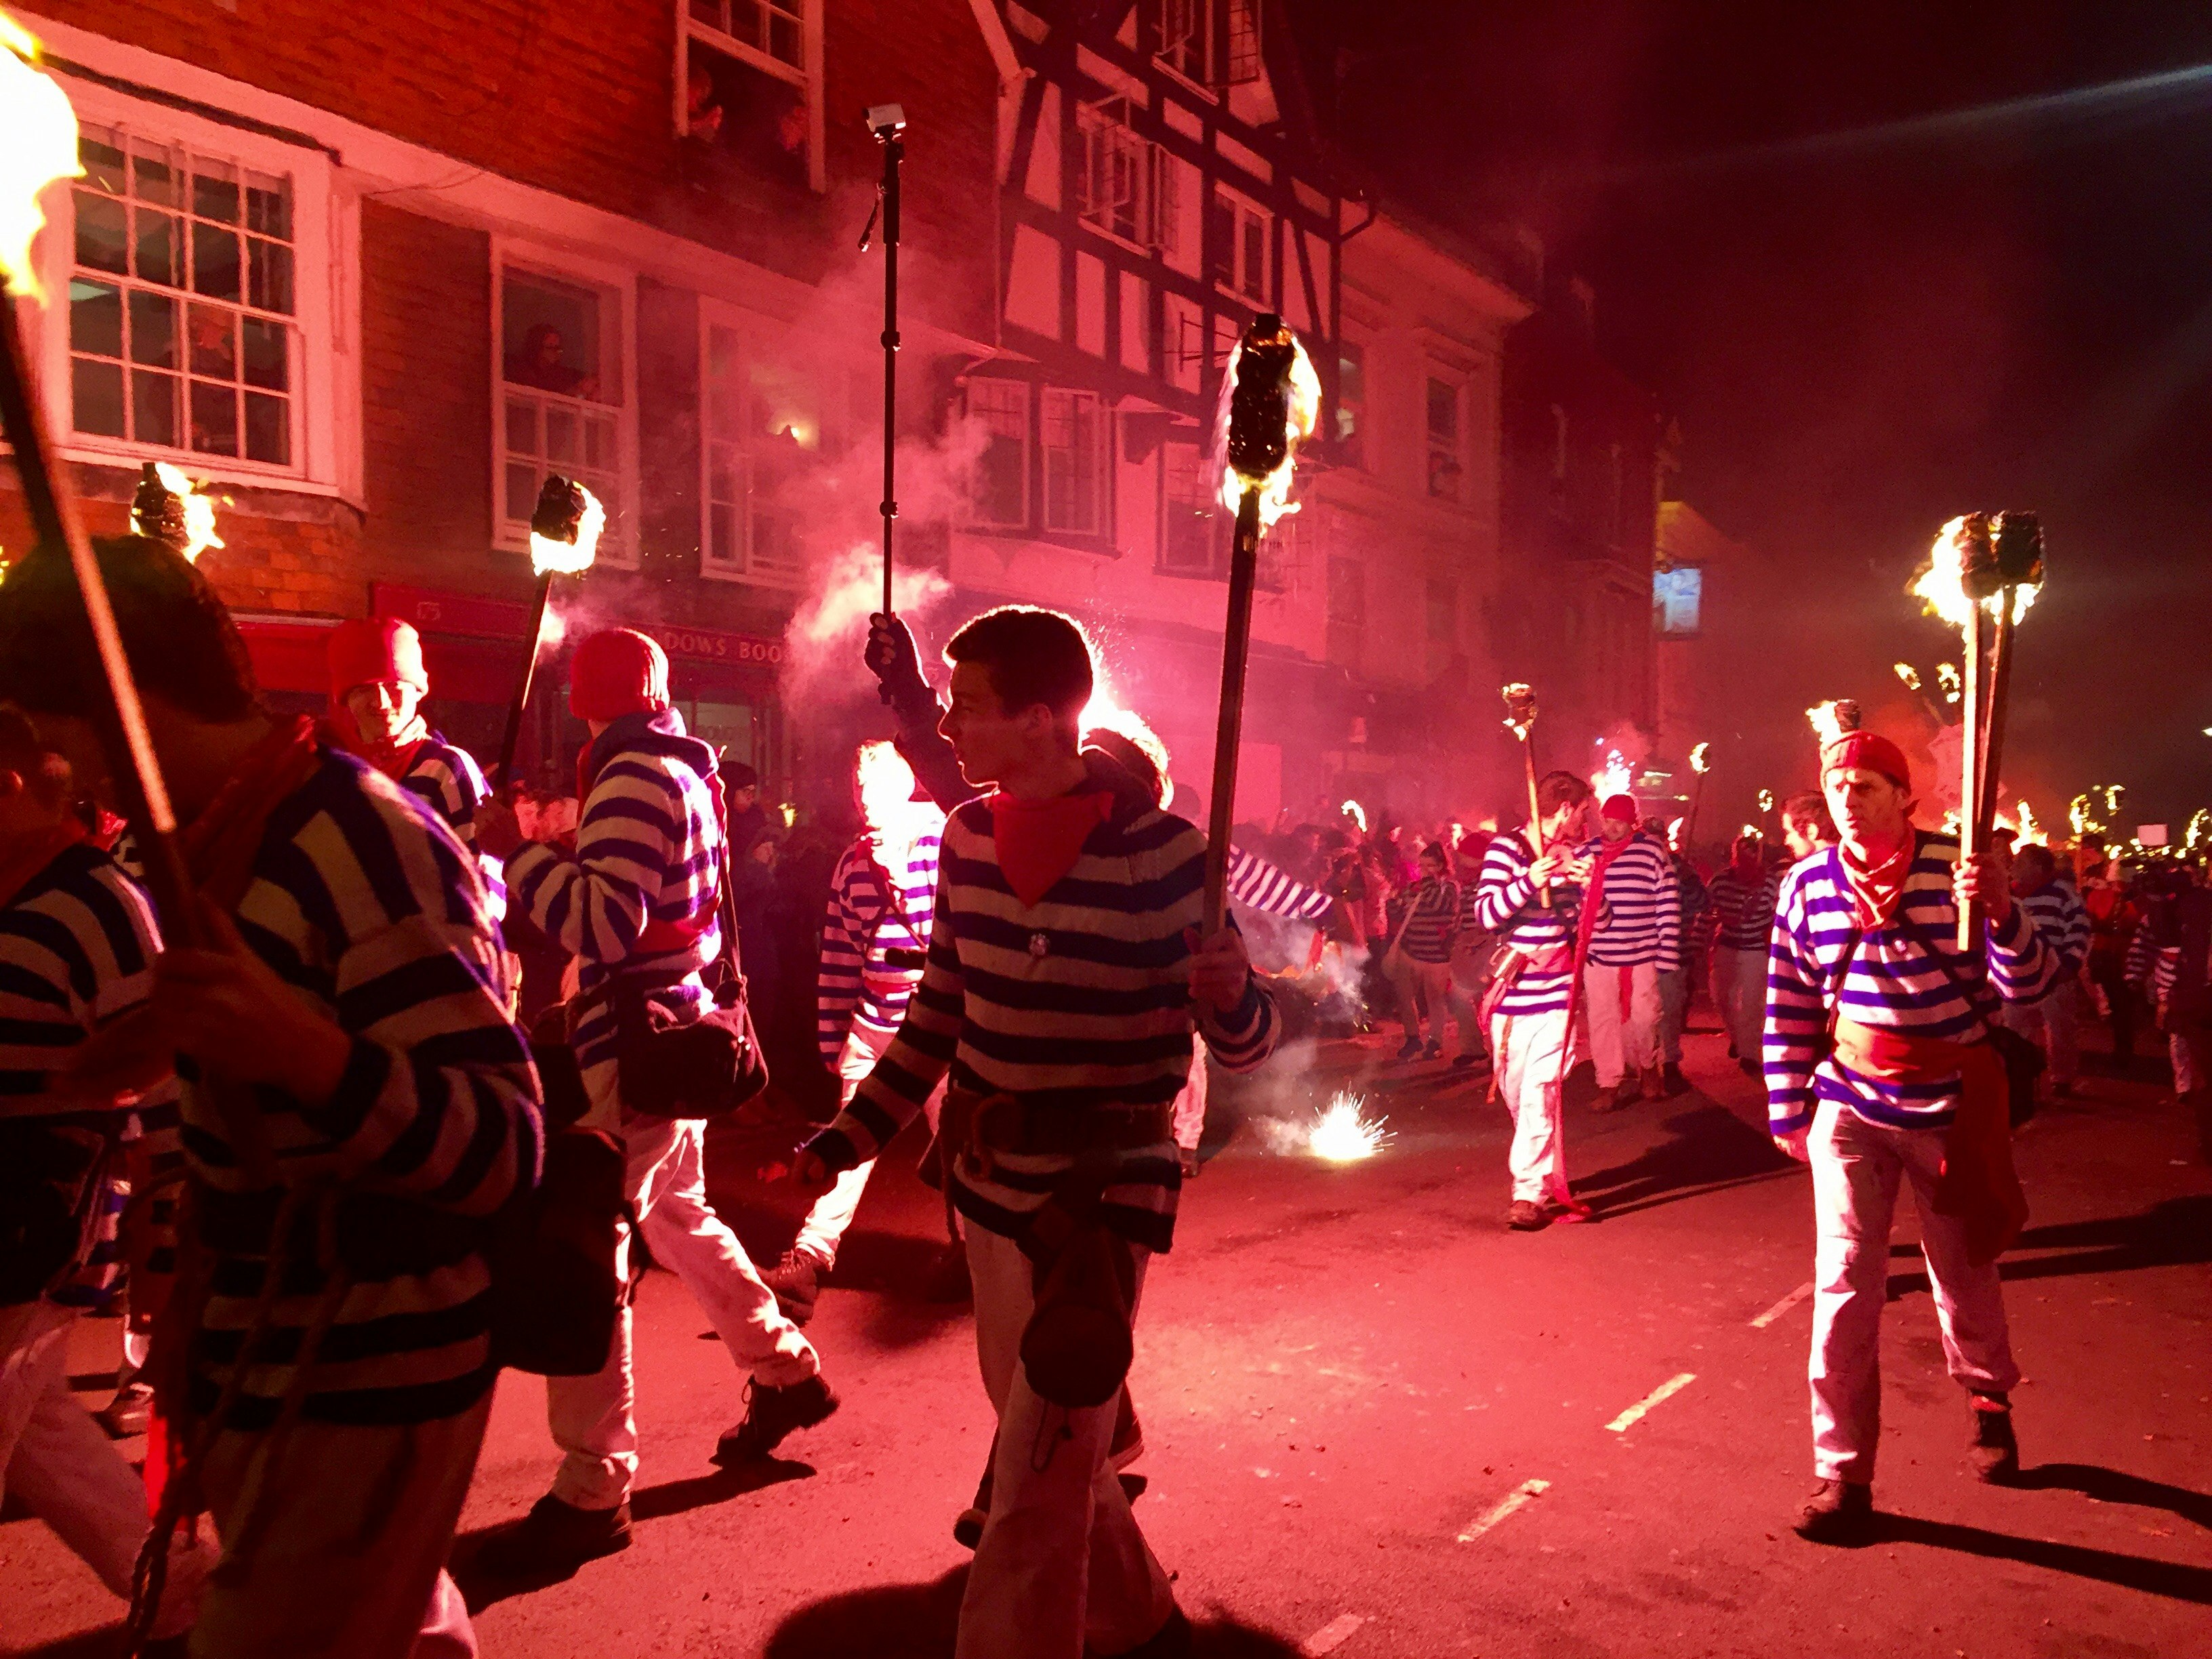 Scores of men and women in matching costumes – white trousers, blue and white striped t-shirts and red neckerchiefs – parade down a narrow street at night, holding flaming torches aloft.